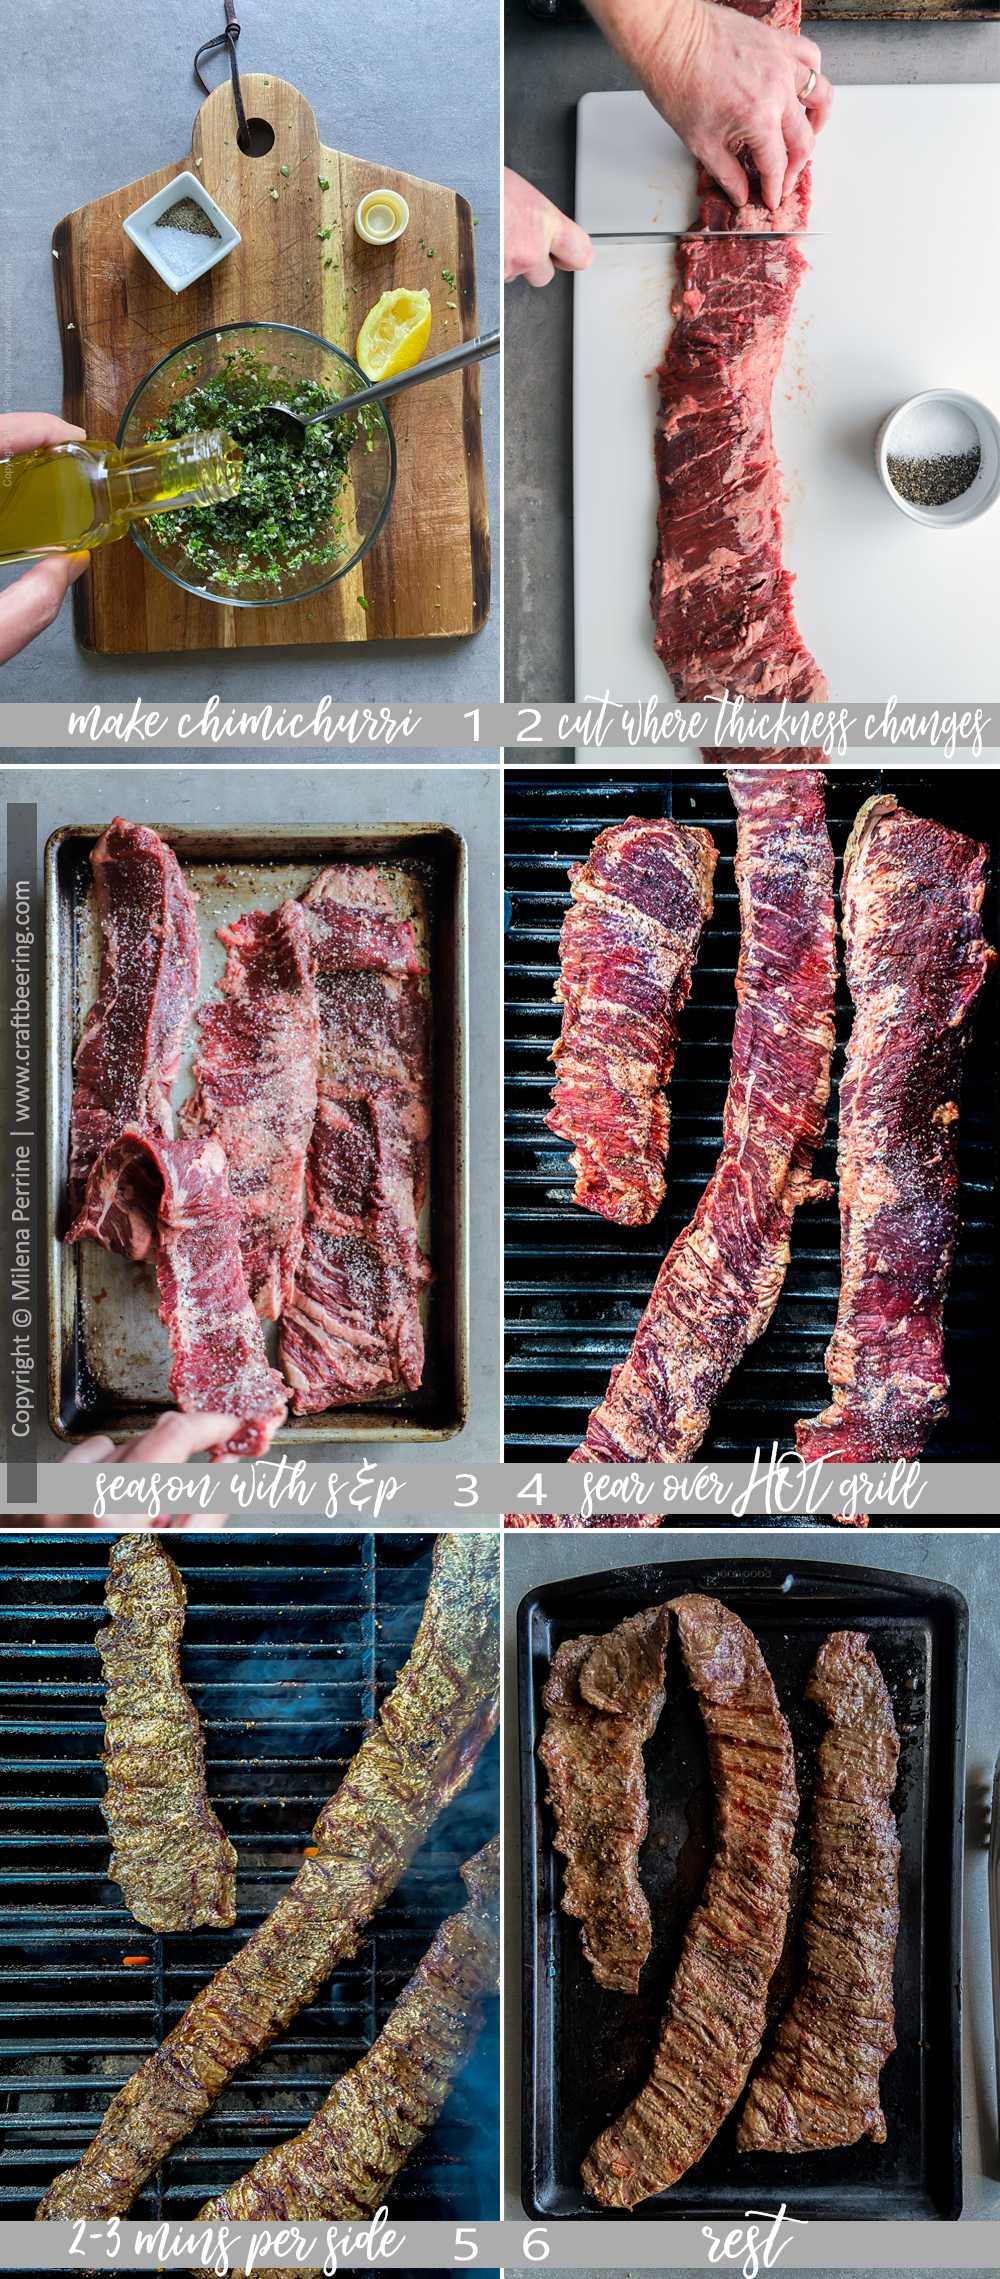 How to grill skirt steak - step by step image collage. Start with a tender outside skirt steak and sear it over hot, hot grates.